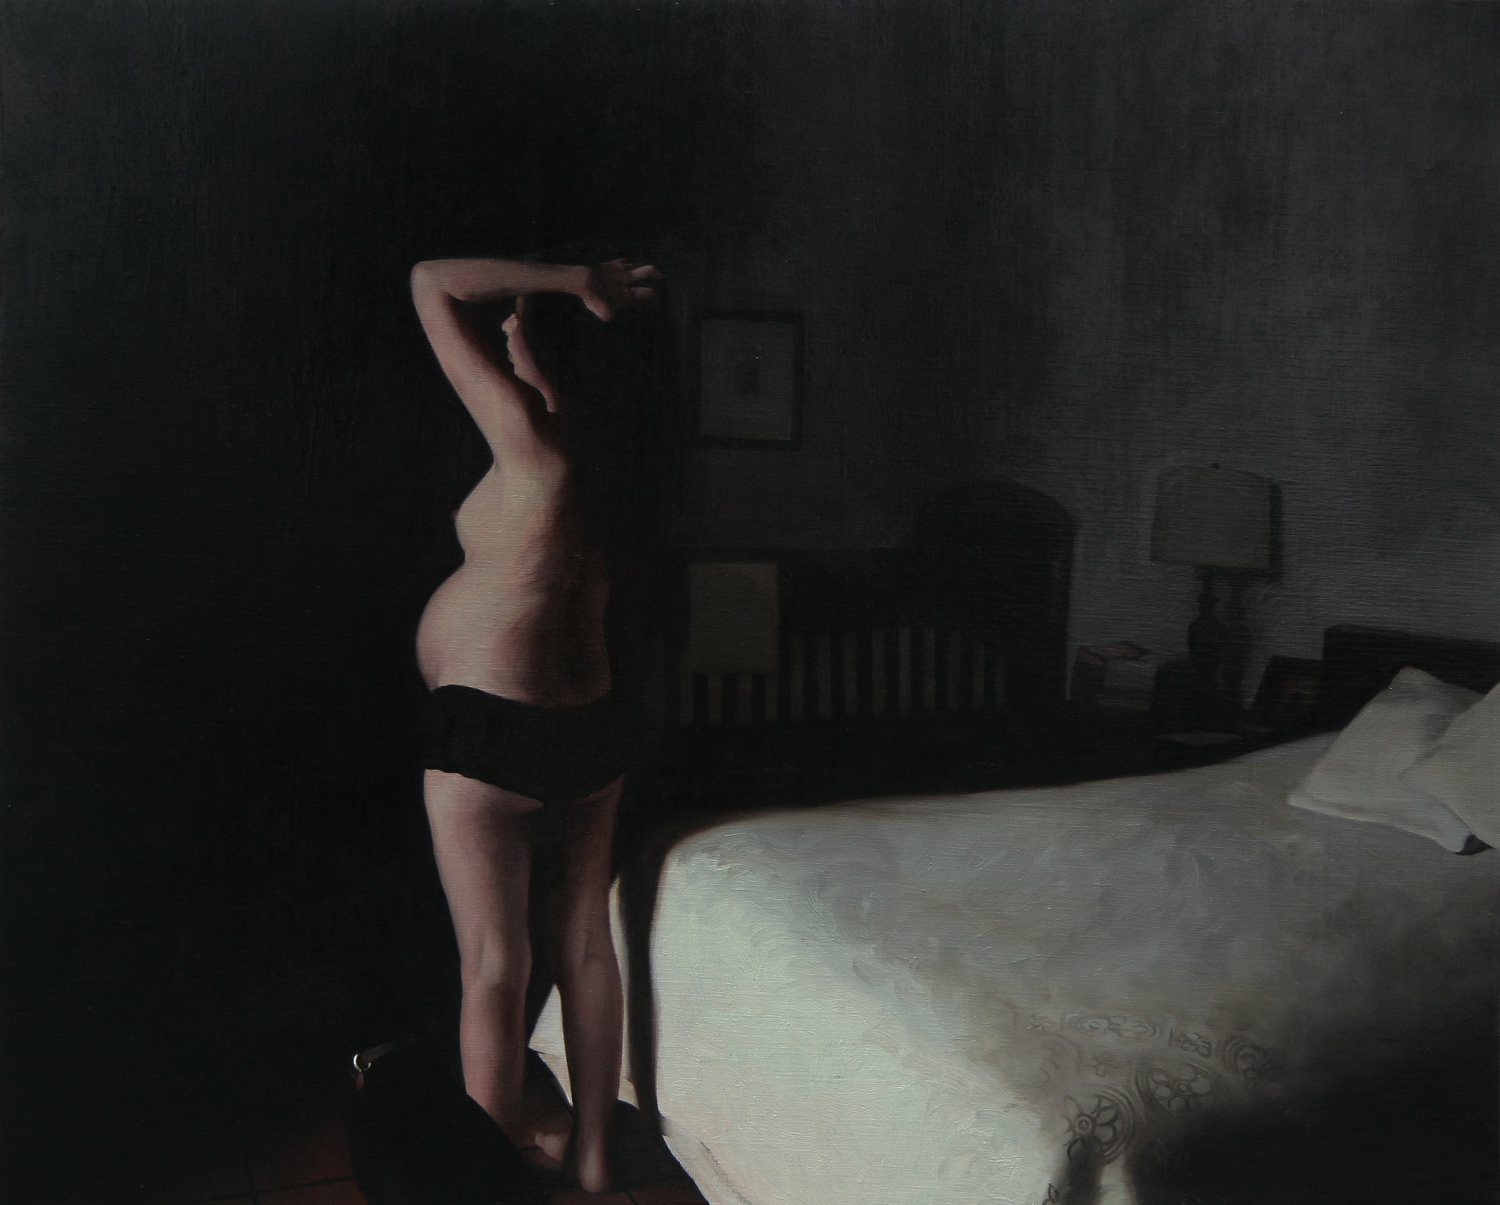   Pregnant , 2011, Oil on linen, 24 x 30 inches, Private collection 